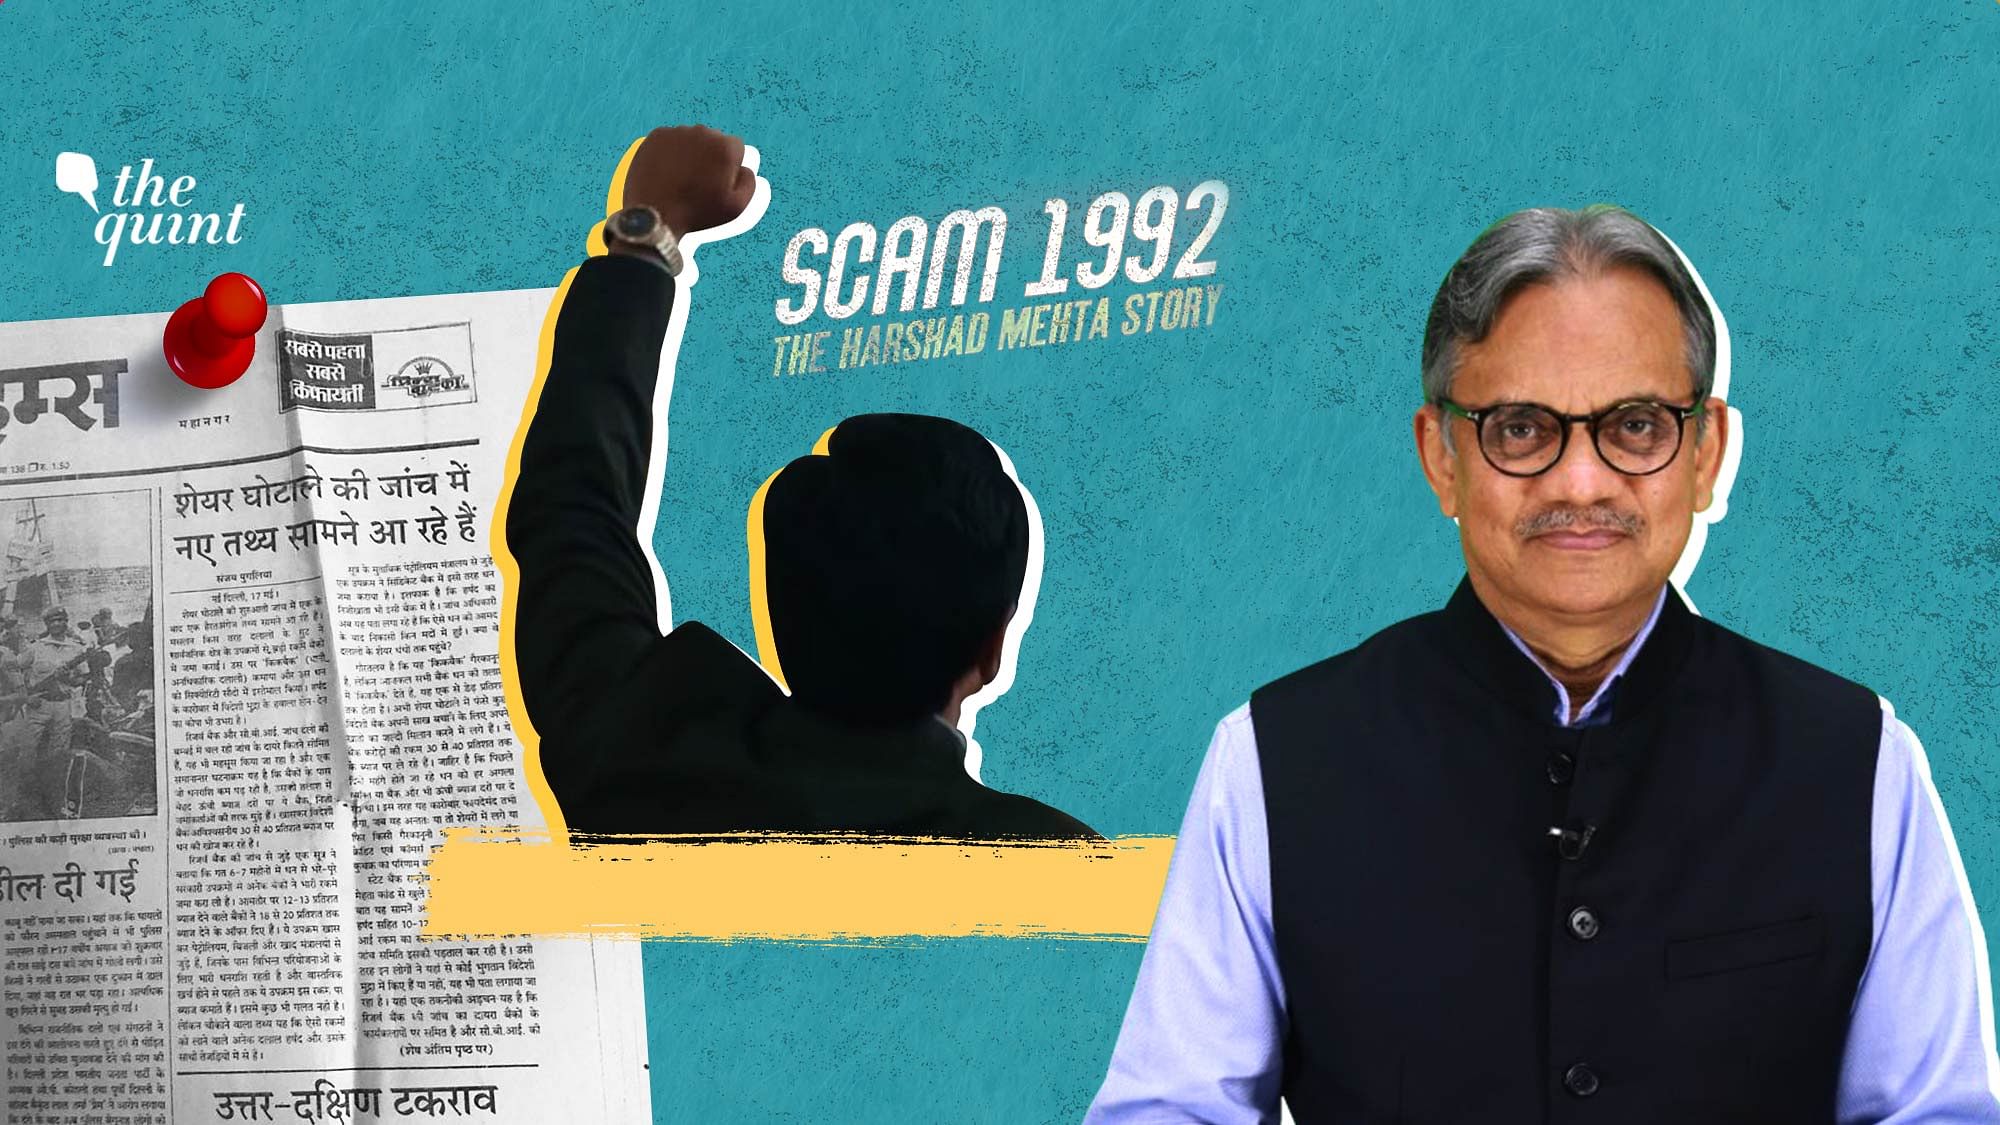 While watching the series ‘Scam 1992: The Harshad Mehta Story’, I was left with a feeling that the more things change, the more they remain the same.